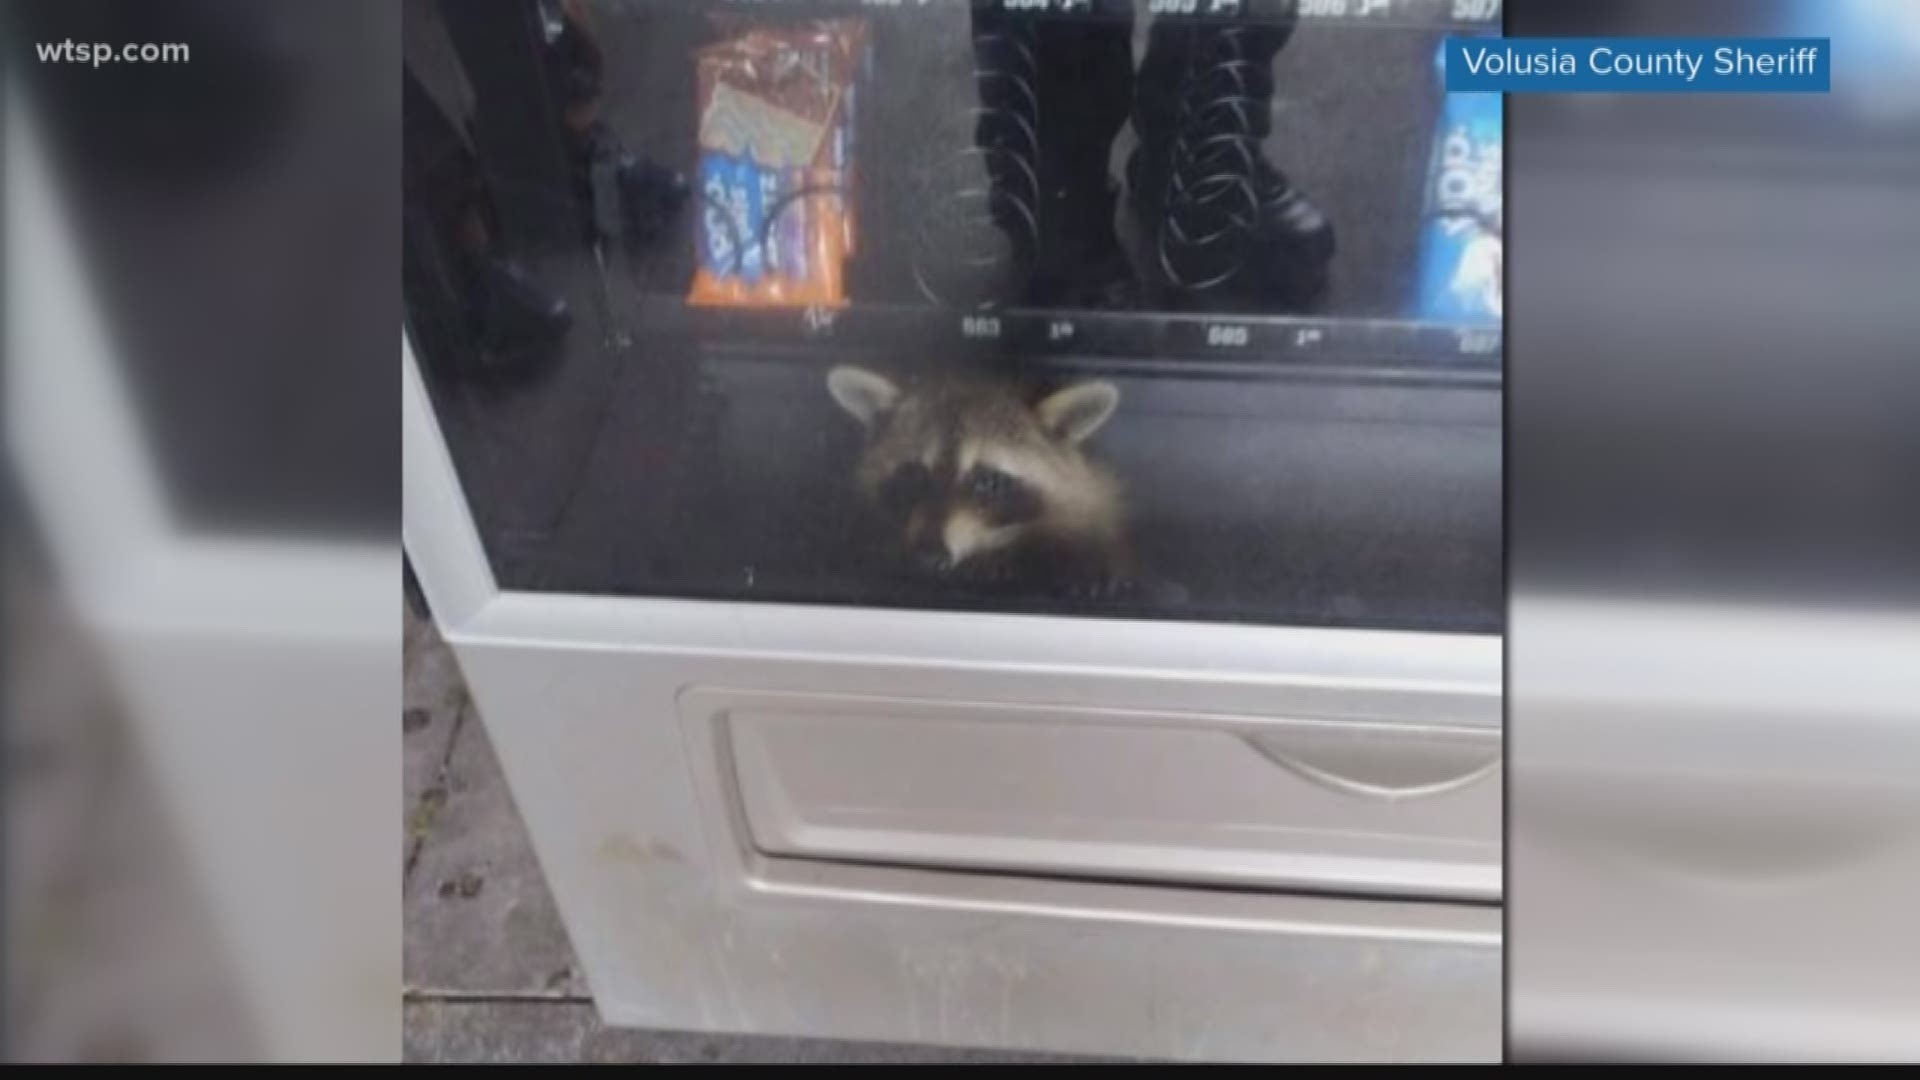 The Volusia County Sheriff's Office sent out photos of a vending machine bandit they caught at Pine Ridge High School in Deltona, Florida.

The raccoon had somehow gotten into the machine but couldn't get back out. 

https://on.wtsp.com/2OSDJH4